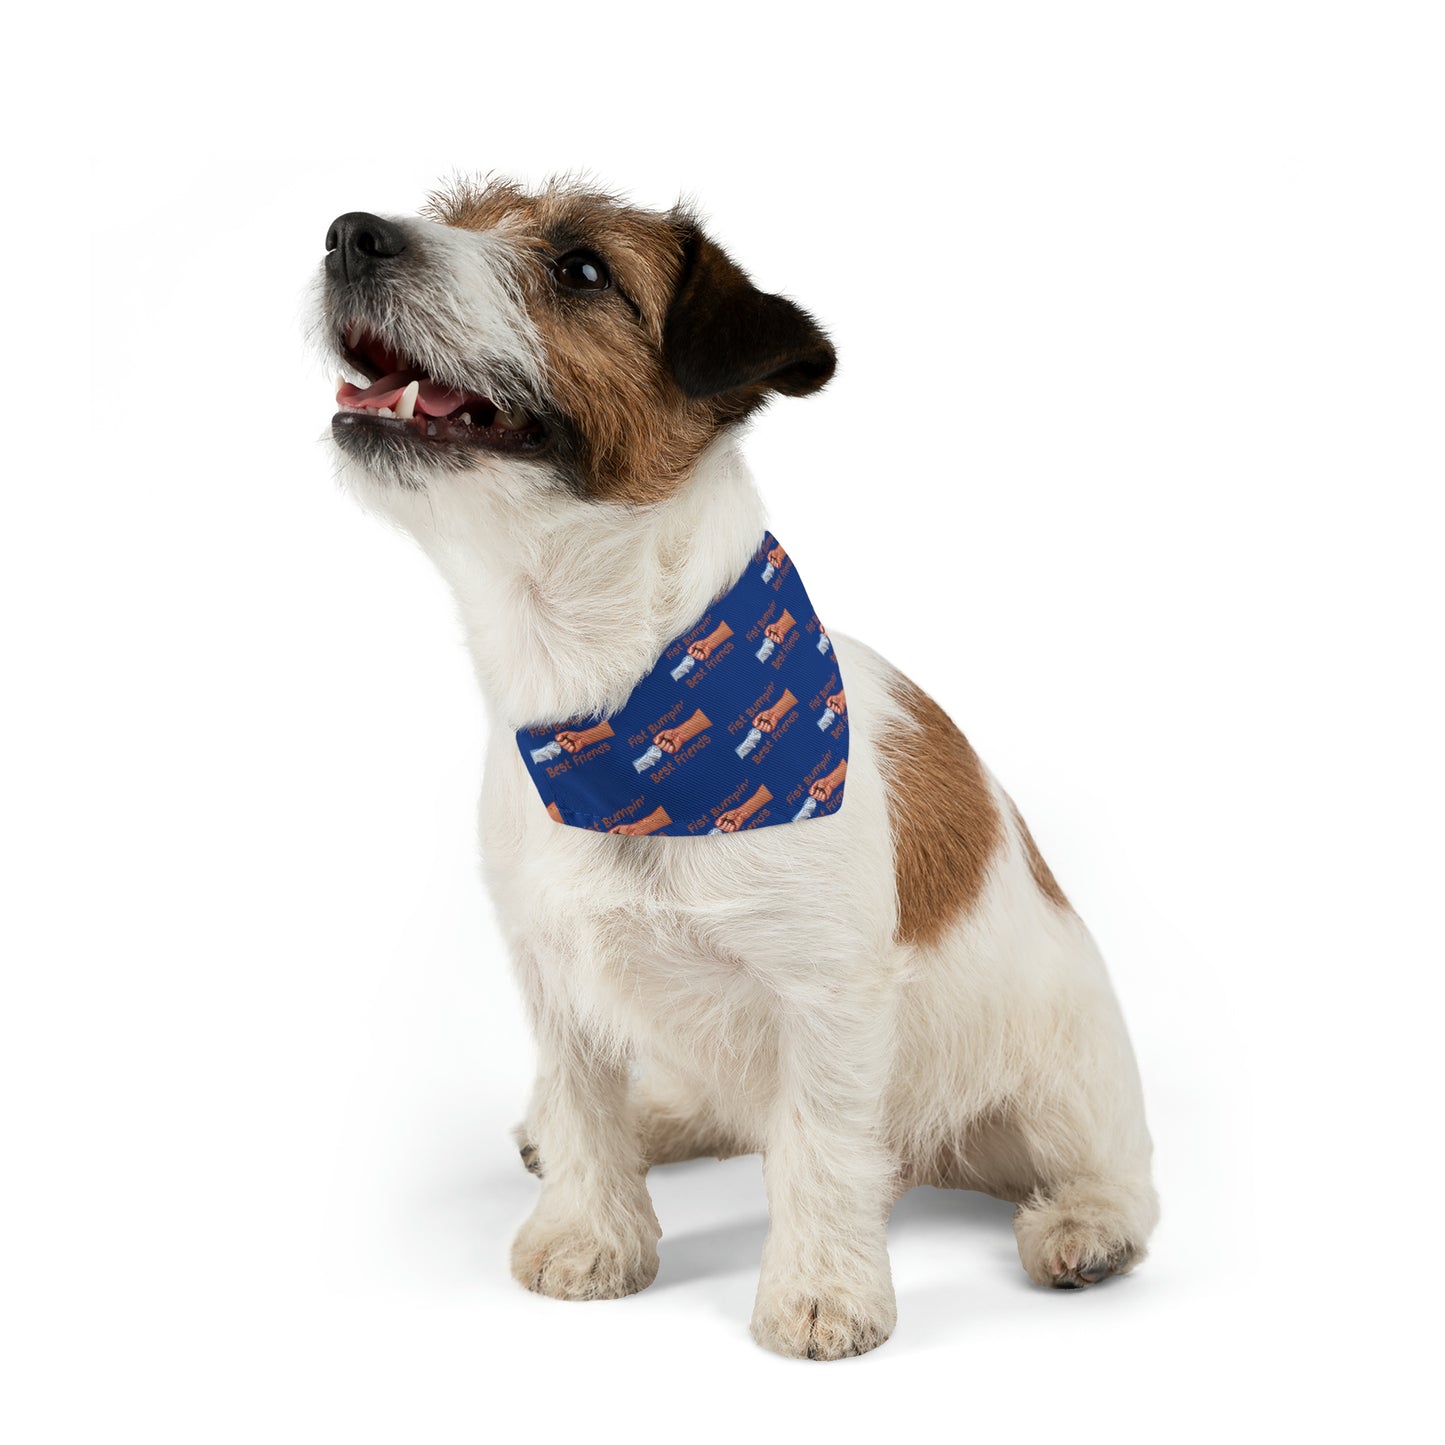 Fist Bumpin’ Best Friends Opie’s Cavalier King Charles Spaniel Pet Bandana Collar Blue with Brown lettering.